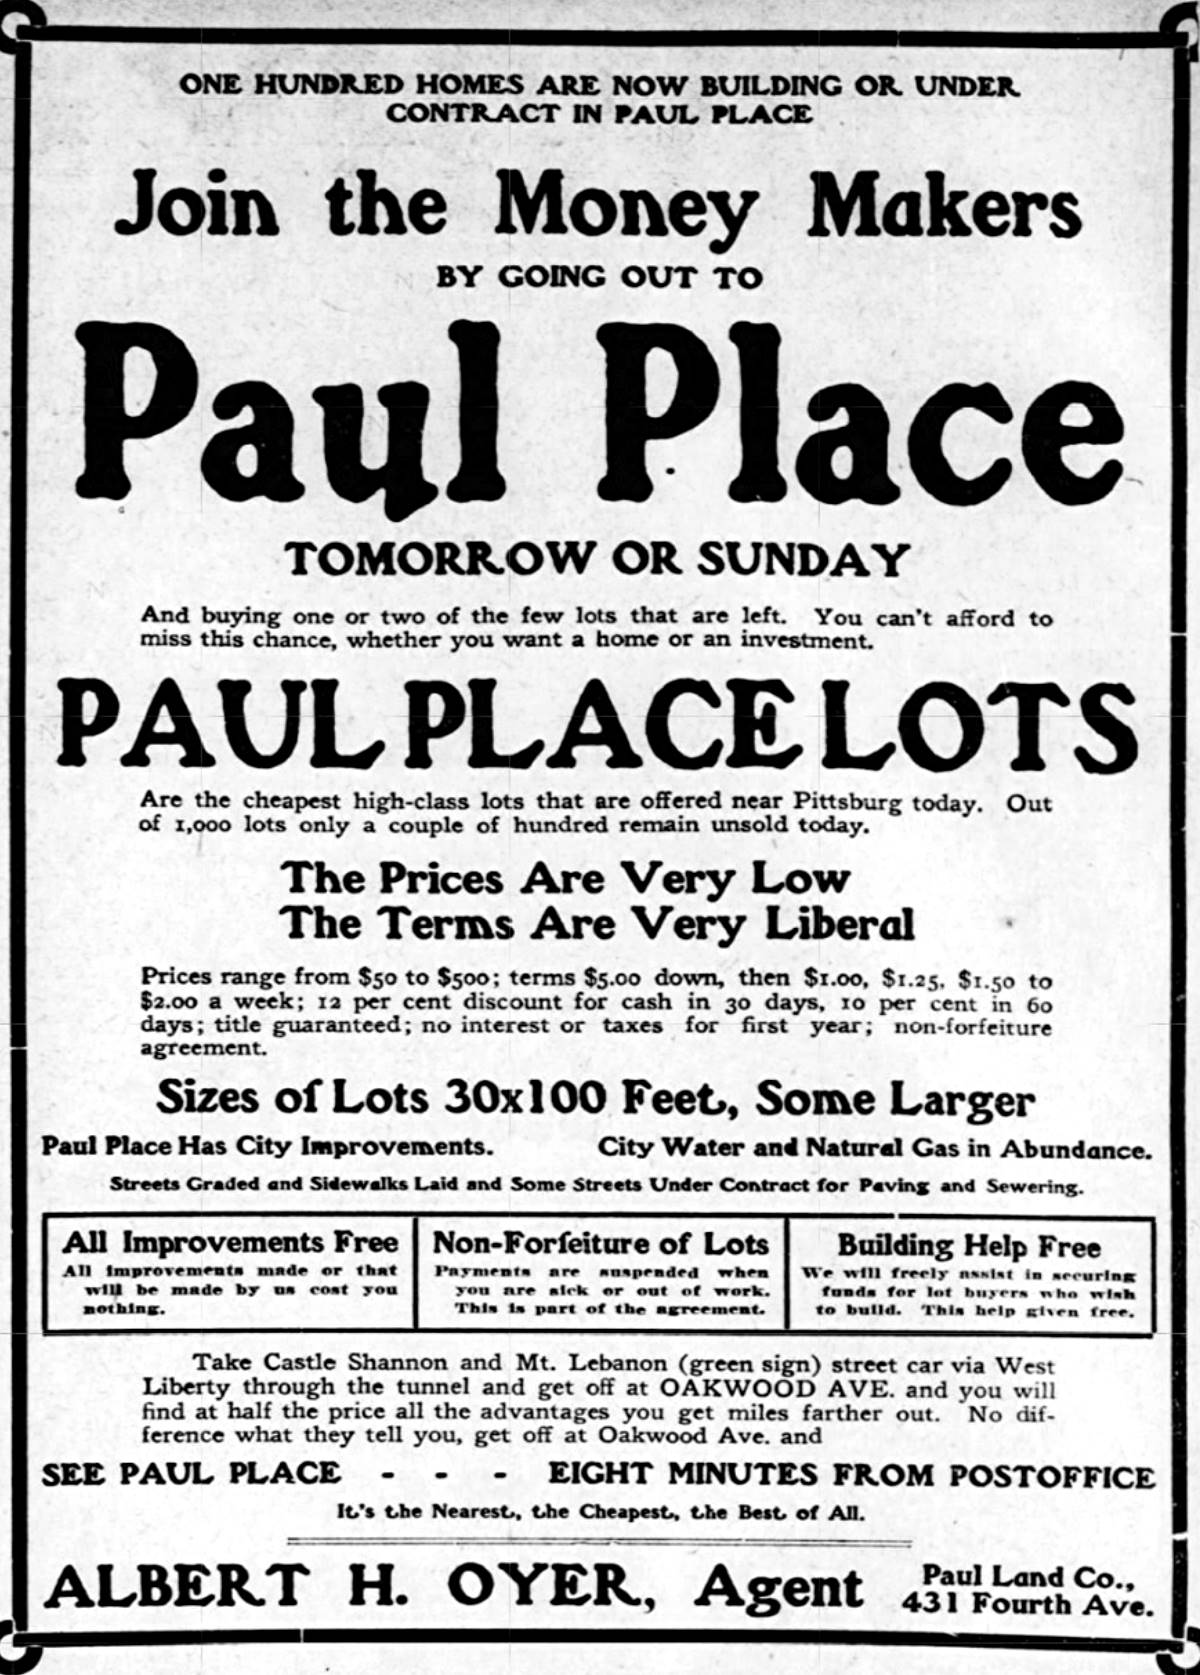 Real Estate Advertisement - May 19, 1905.